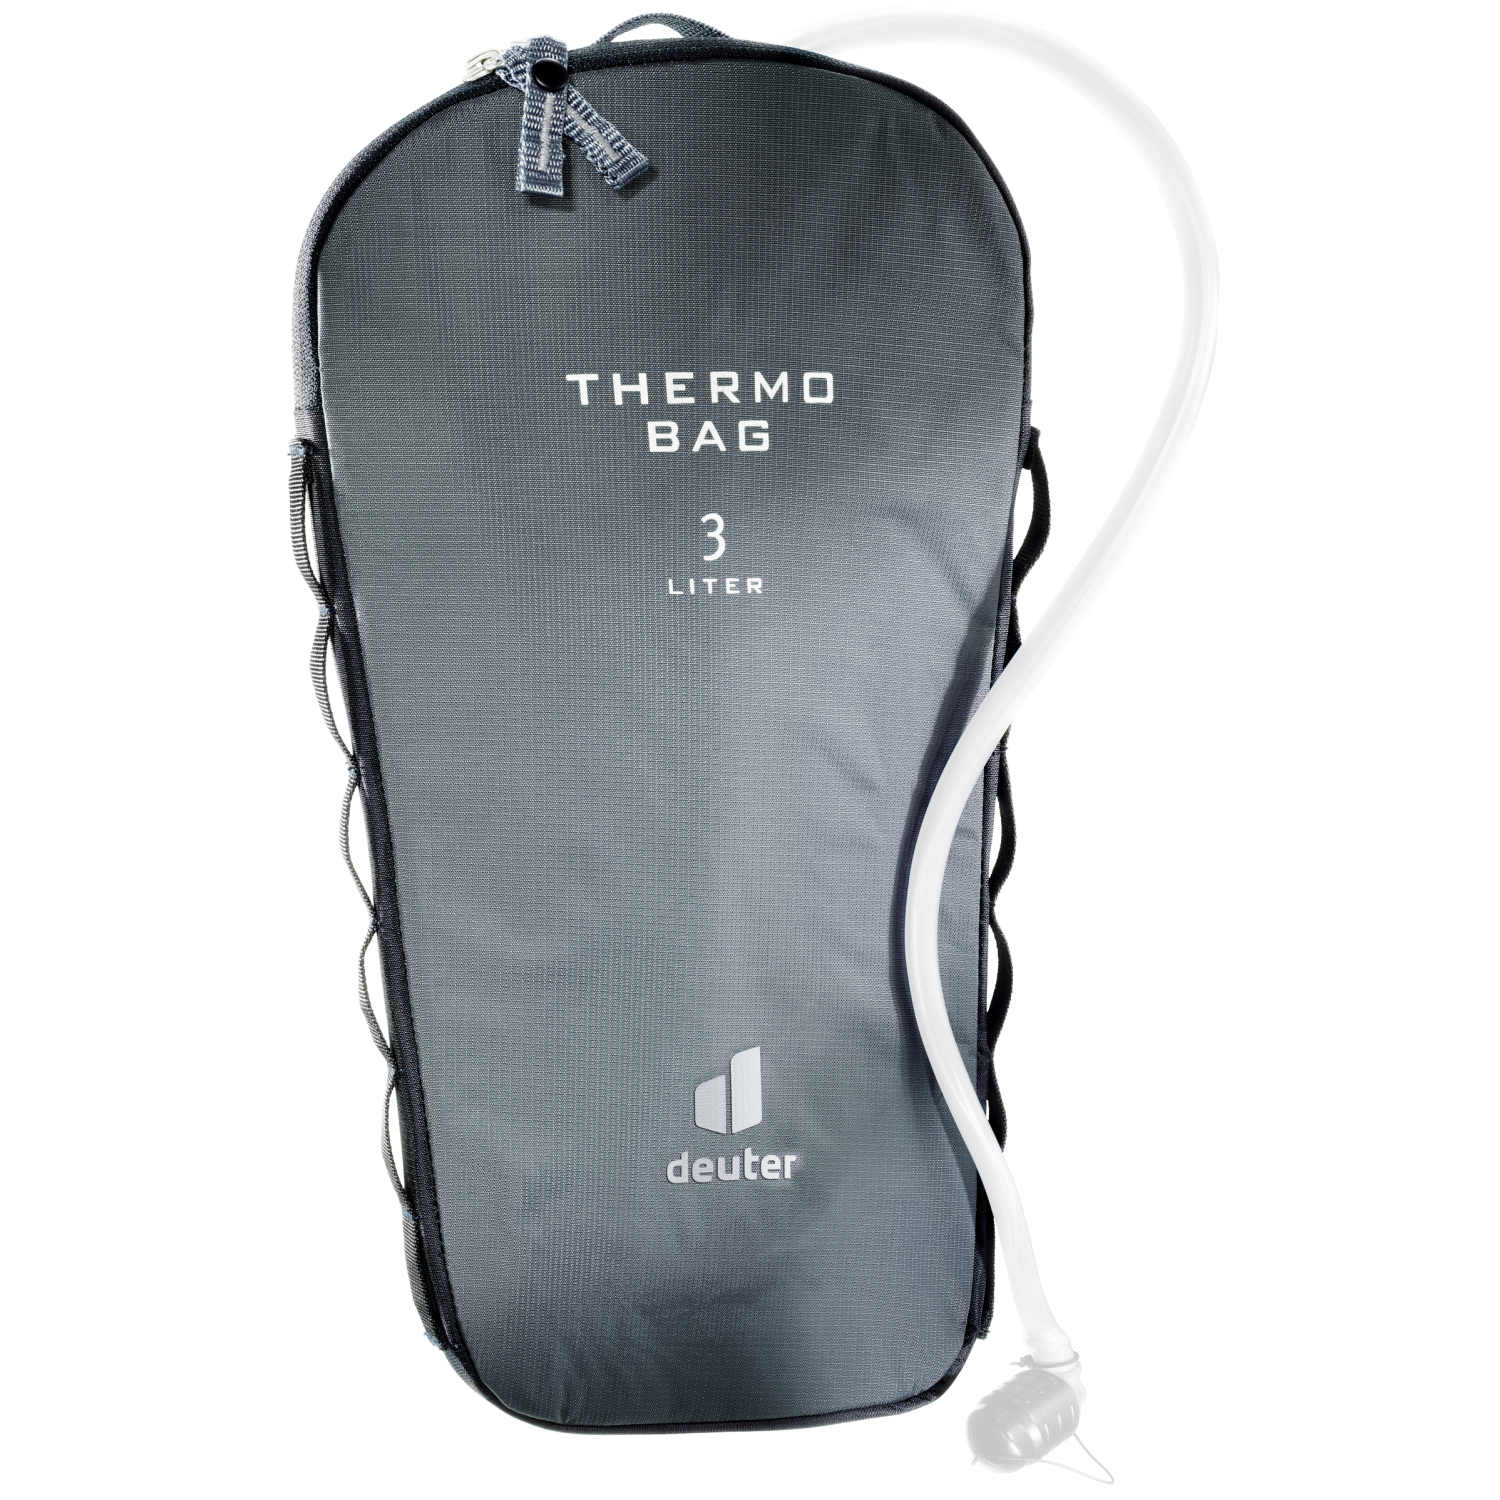 ▷ Deuter - l 3.0 Thermo Bag Thermotasche Streamer